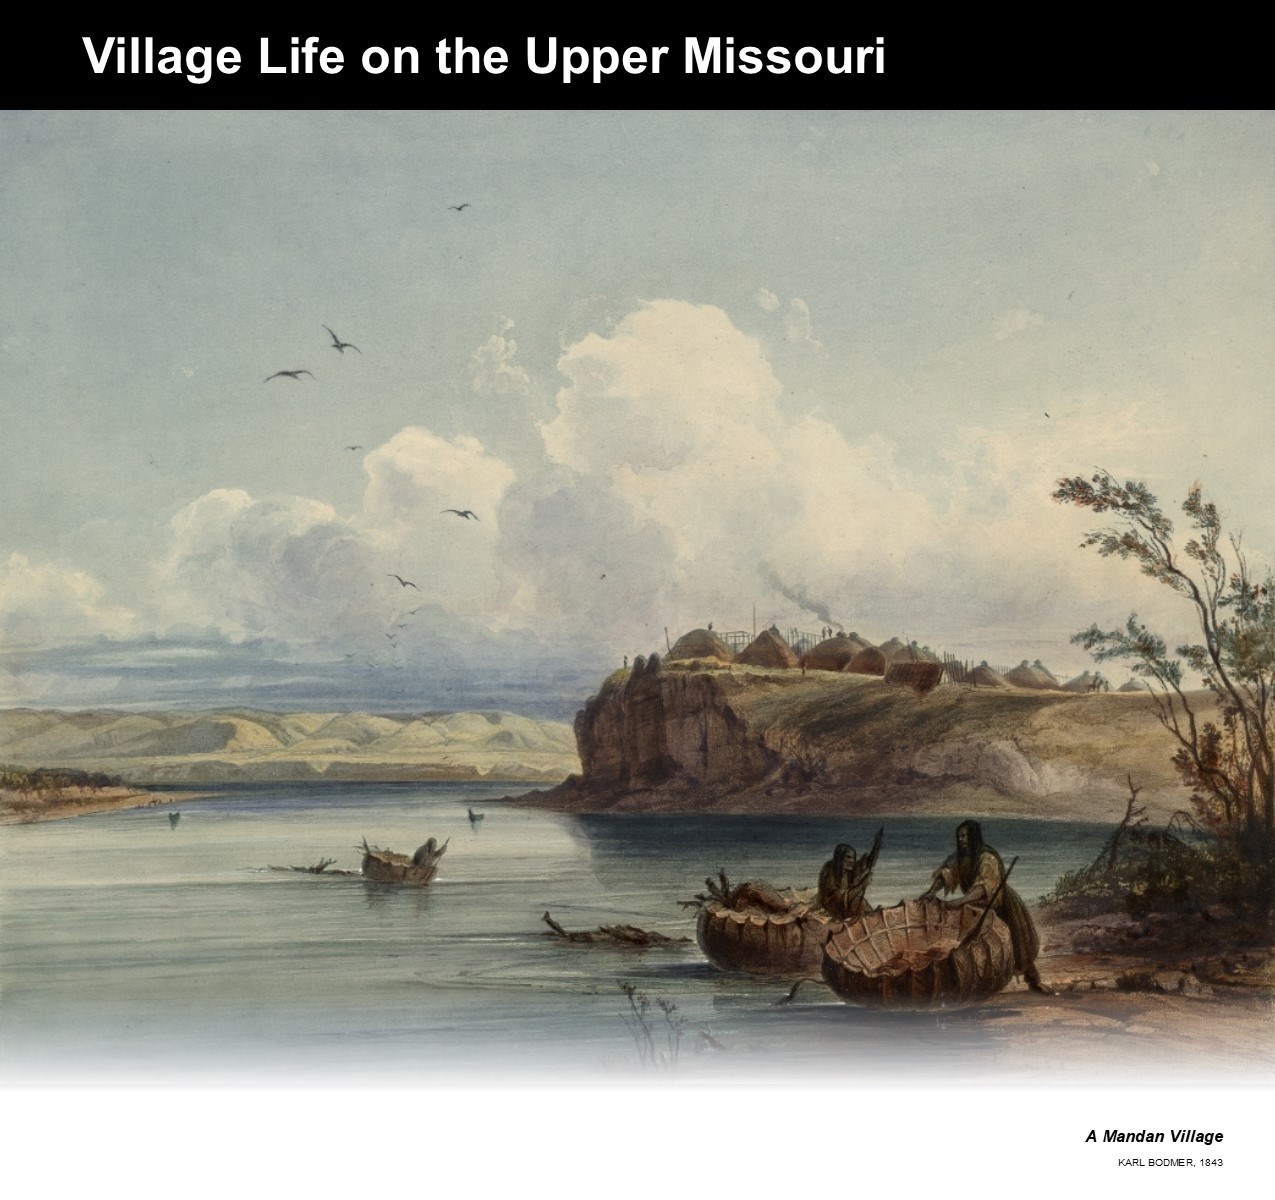 Village Life on the Upper Missouri. Artist Karl Bodmer. A Mandan earthlodge village above a river with native americans riding bull boats.